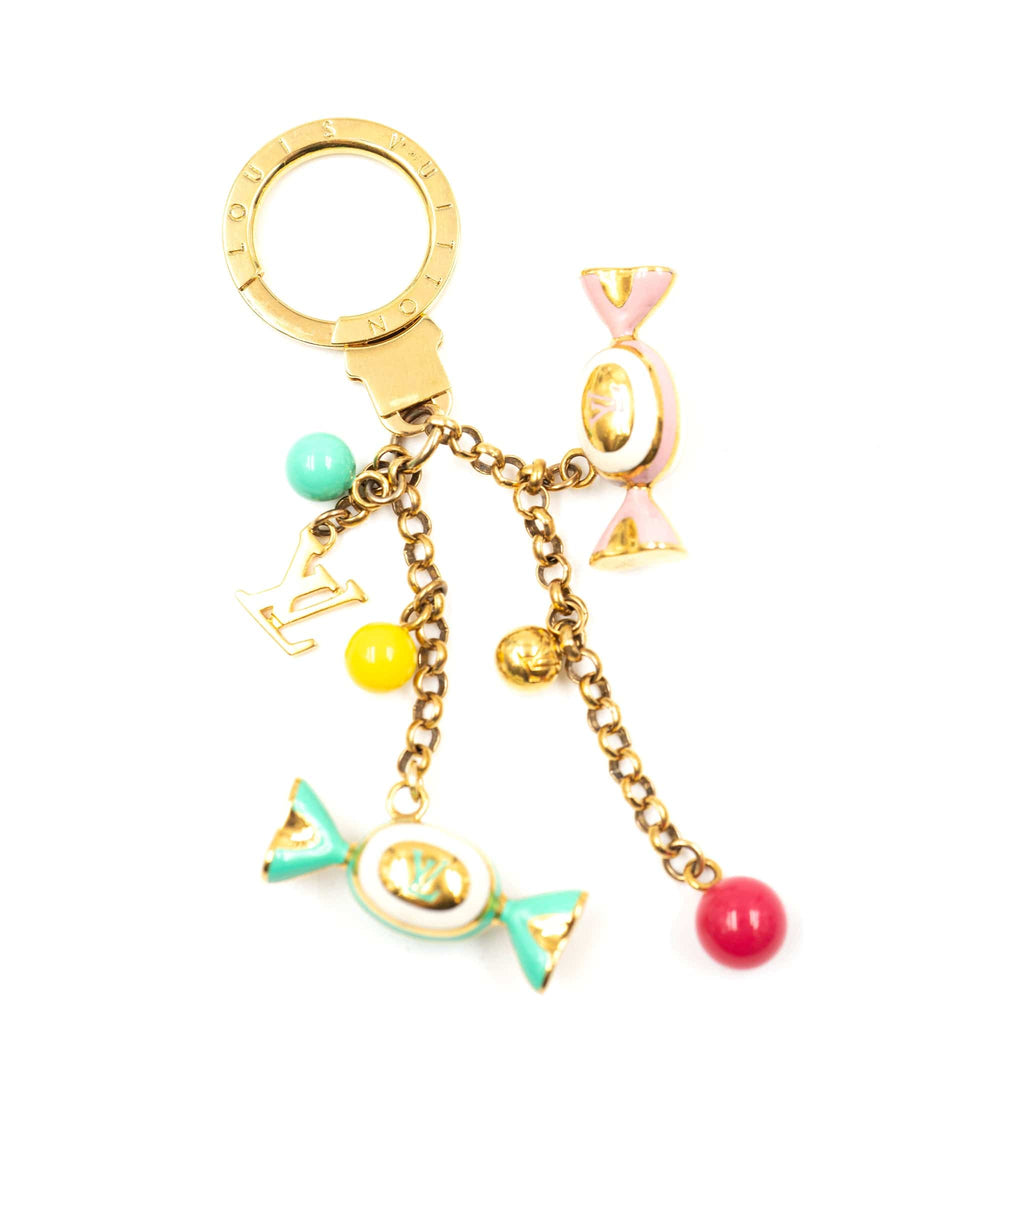 Golden Louis Vuitton Keychain with a golden keyring, vector, color